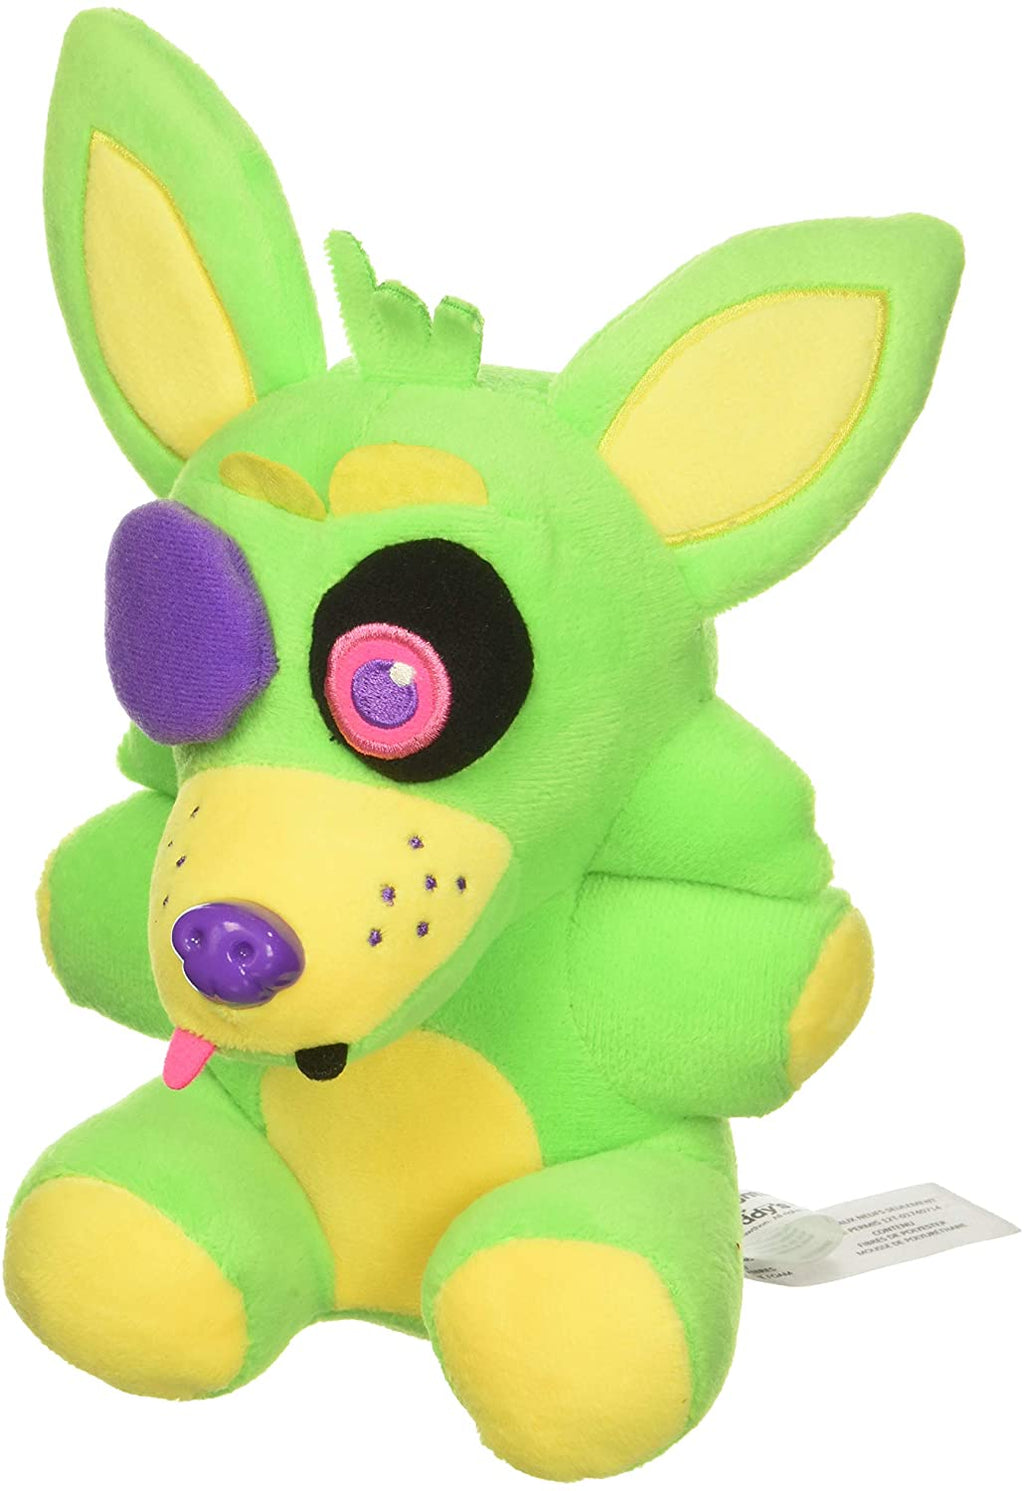 Plush Toys Five Nights At Freddy's items - i love fnaf